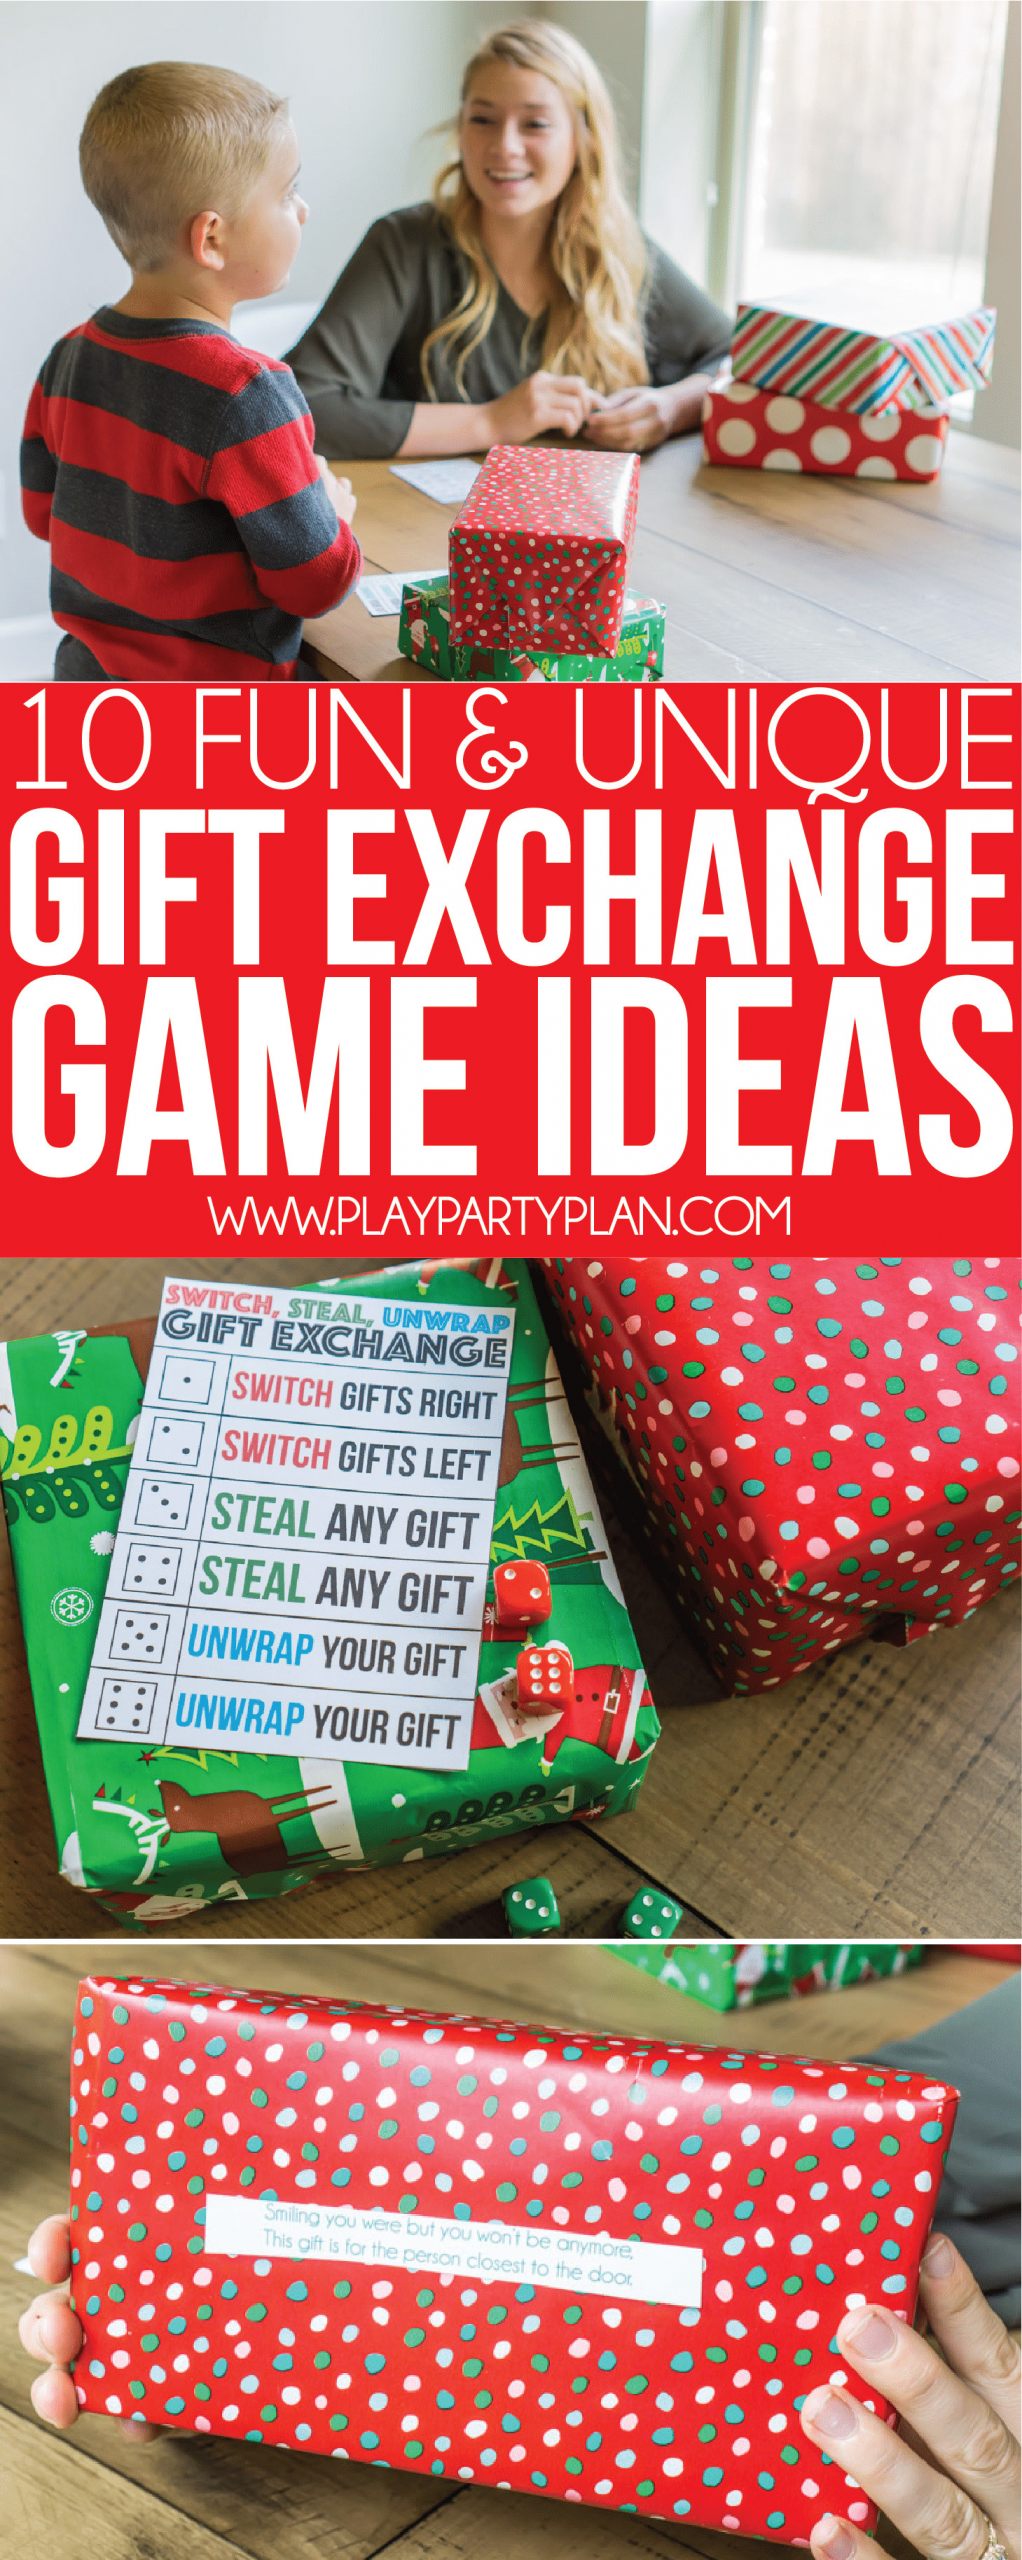 Gift Exchange Ideas For Kids
 12 Best Christmas Gift Exchange Games Play Party Plan